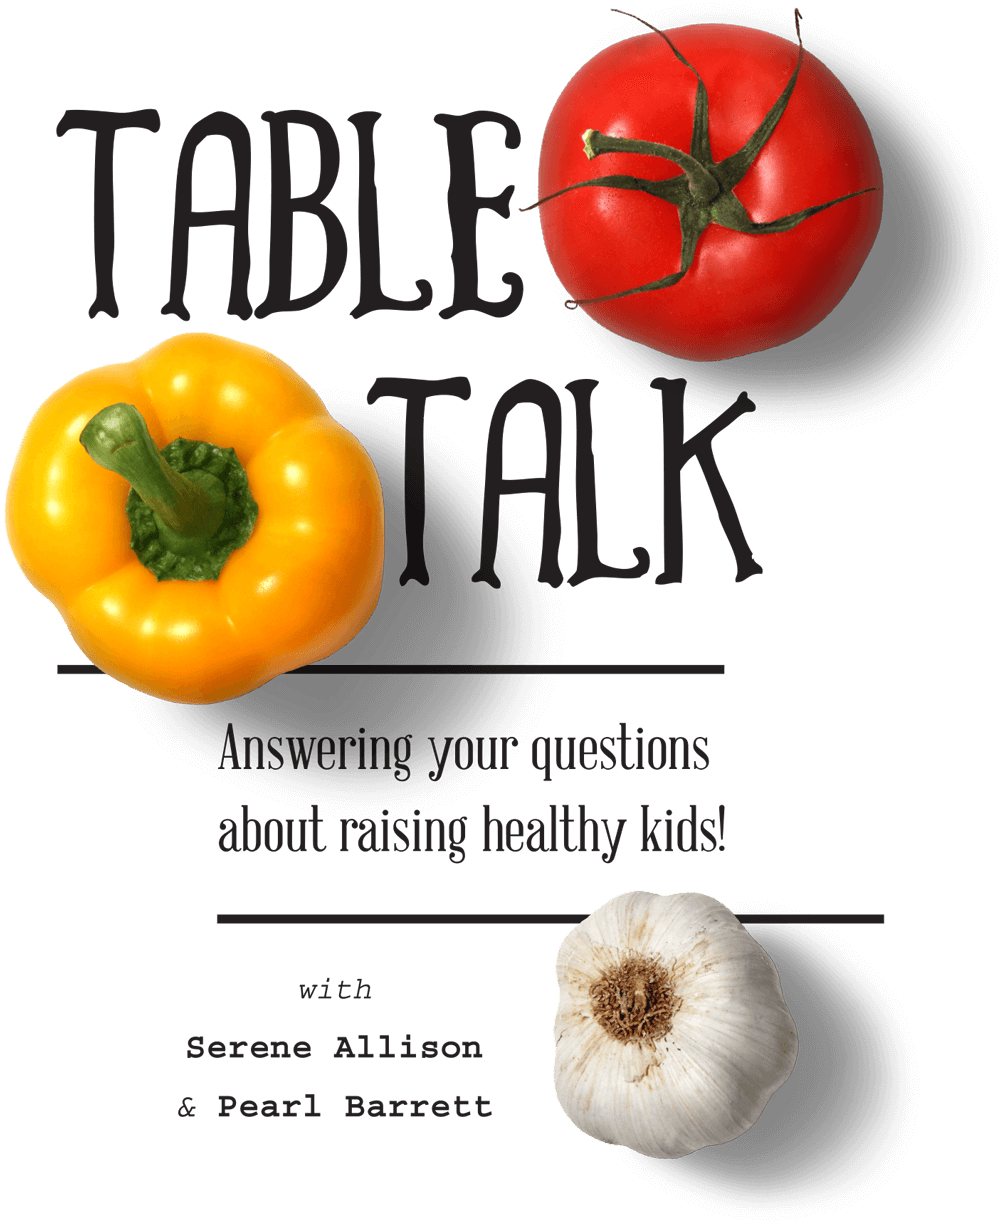 Table Talk: Answering your questions about raising healthy kids! with Serene Allison & Pearl Barrett